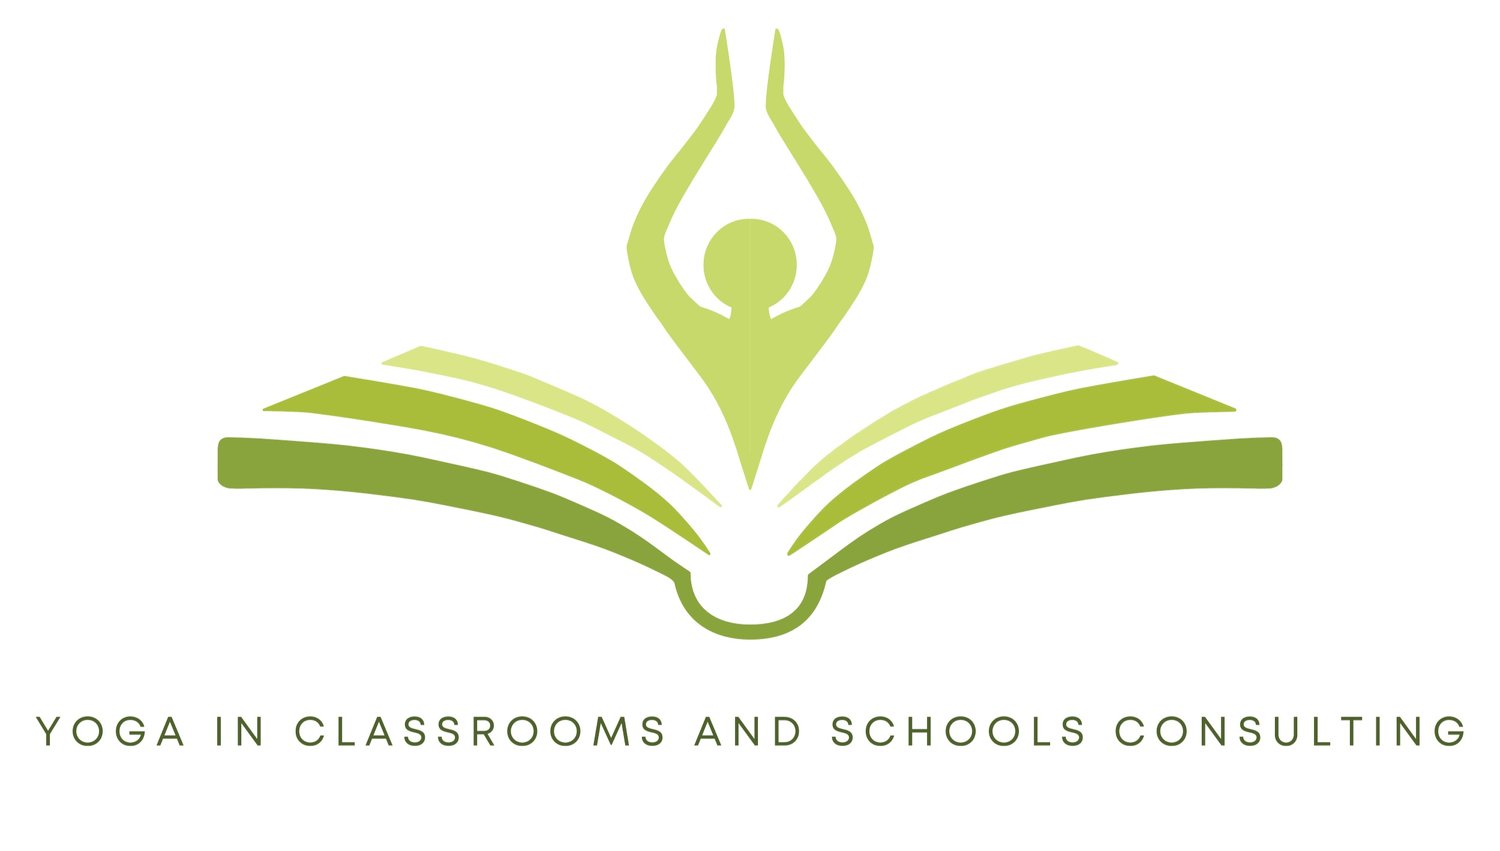 Yoga In Classrooms and Schools